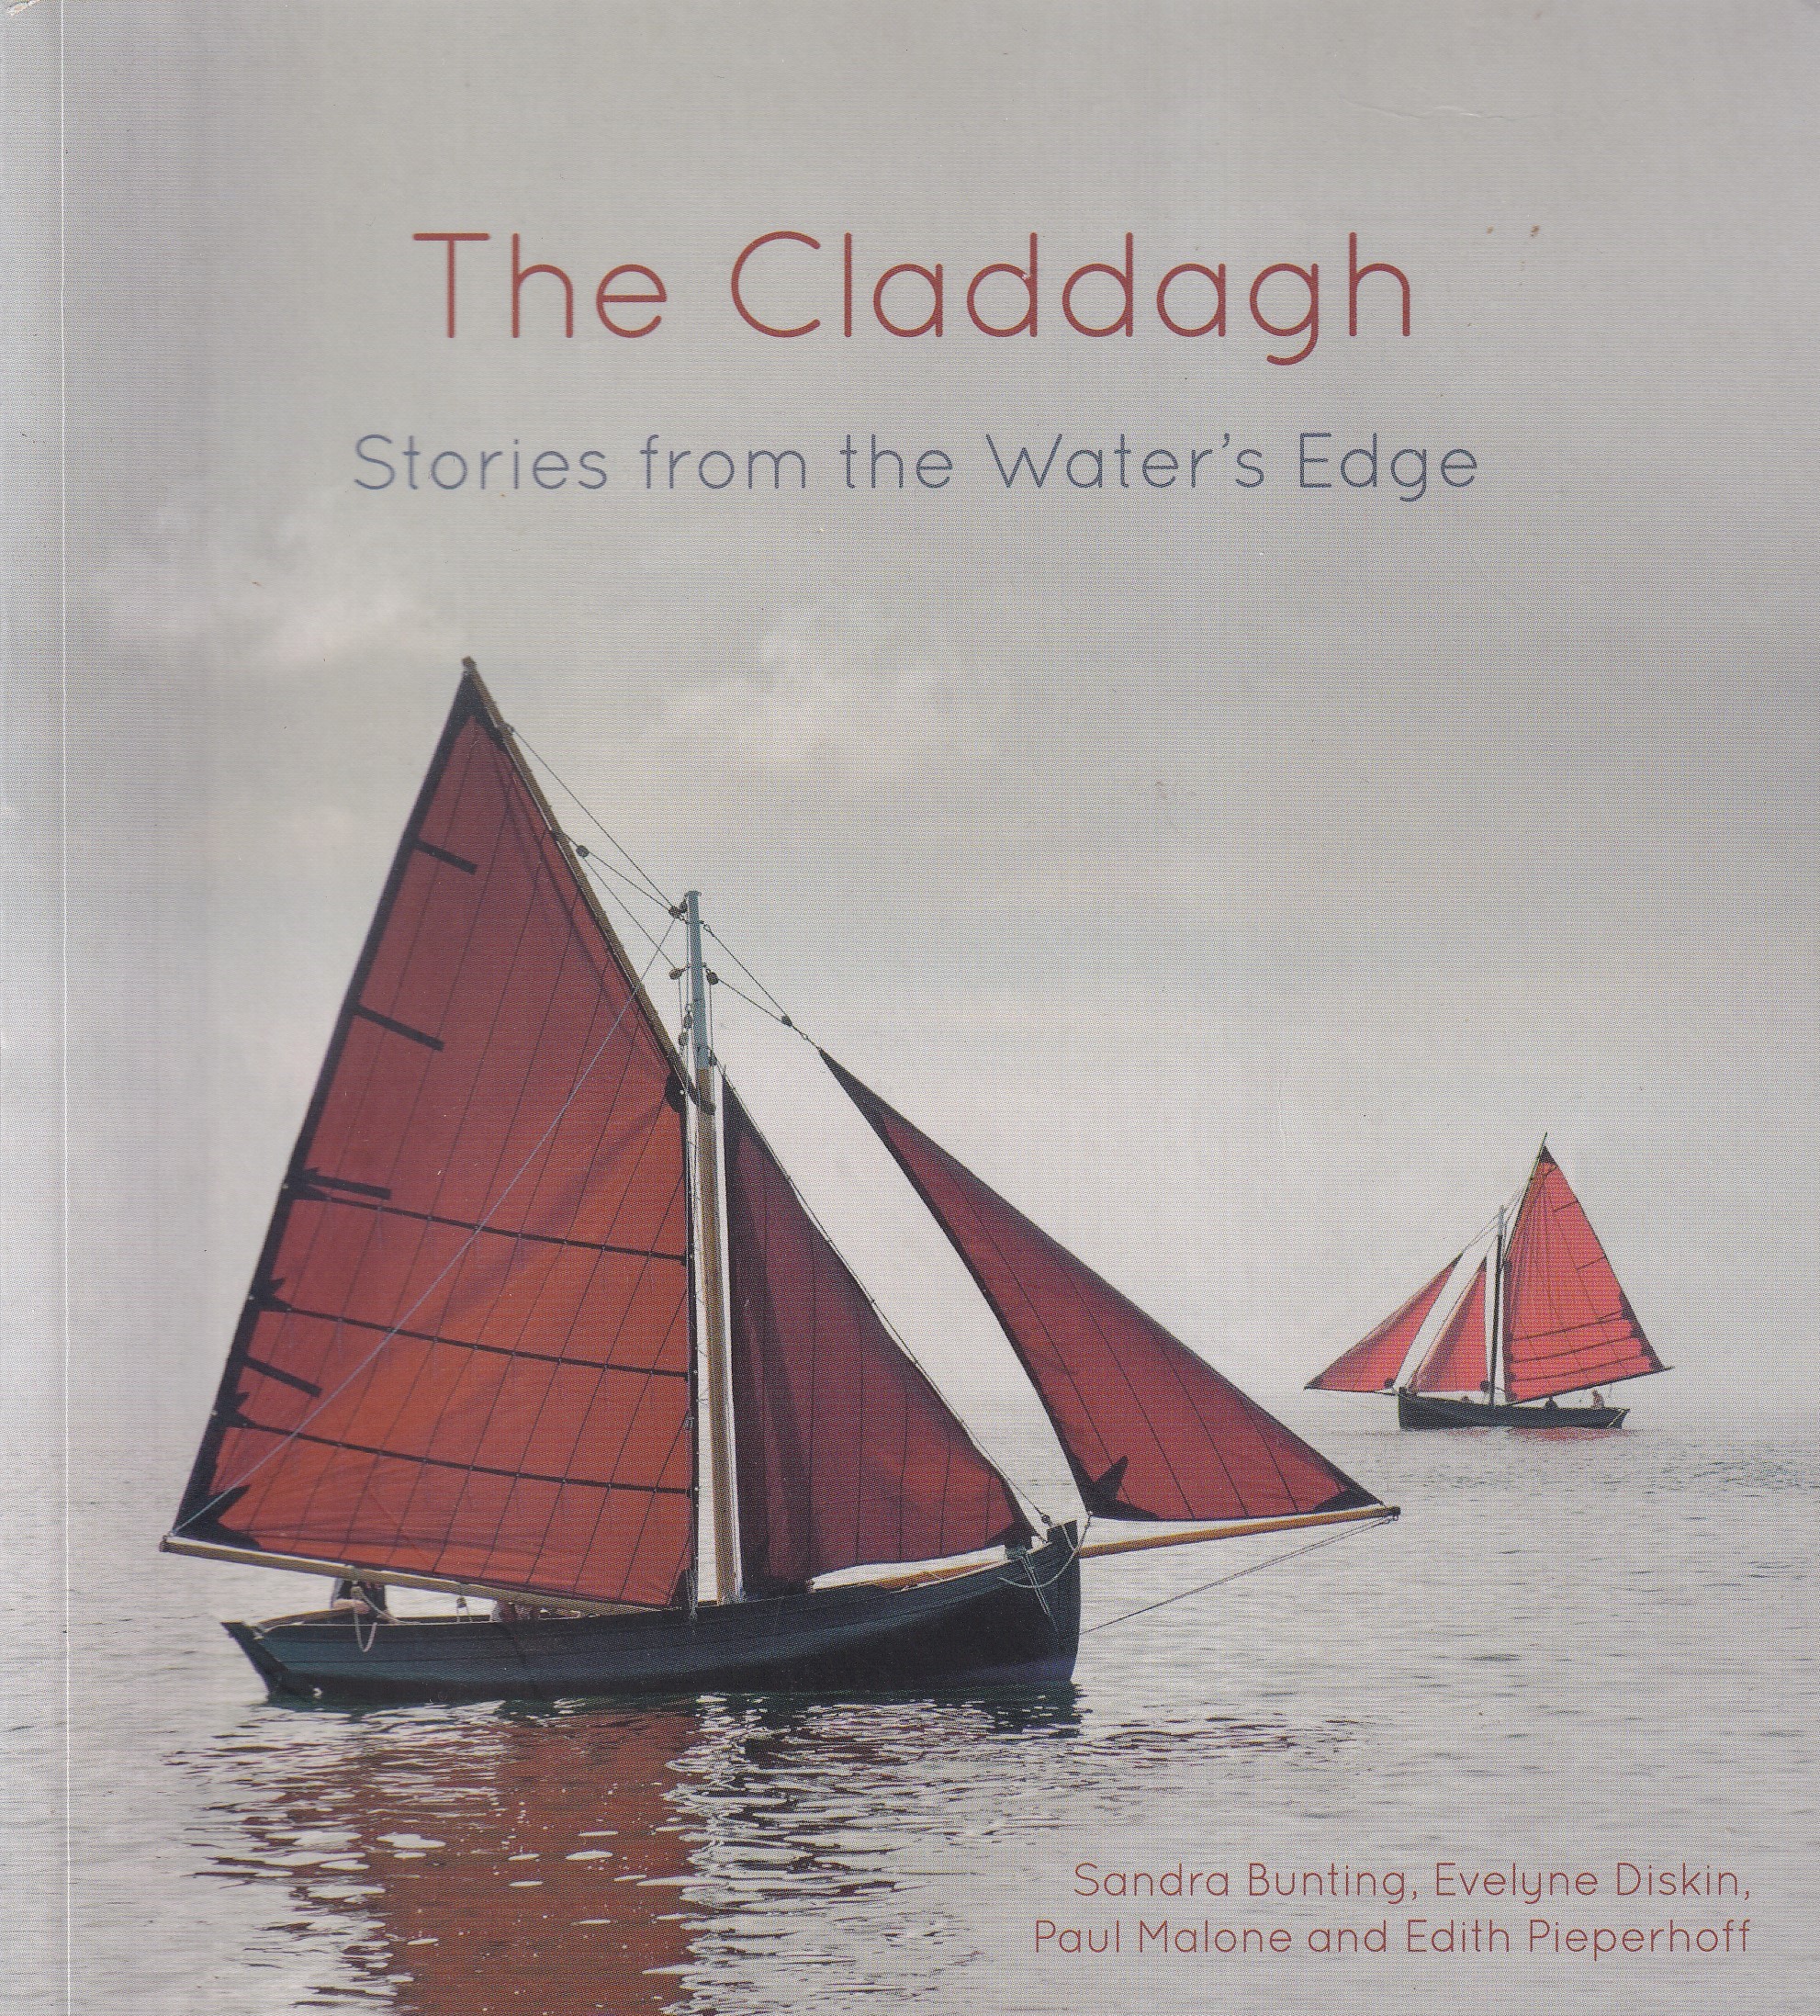 The Claddagh: Stories from the Water’s Edge | Sandra Bunting, Evelyne Diskin, Paul Malone and Edith Pieperhoff | Charlie Byrne's